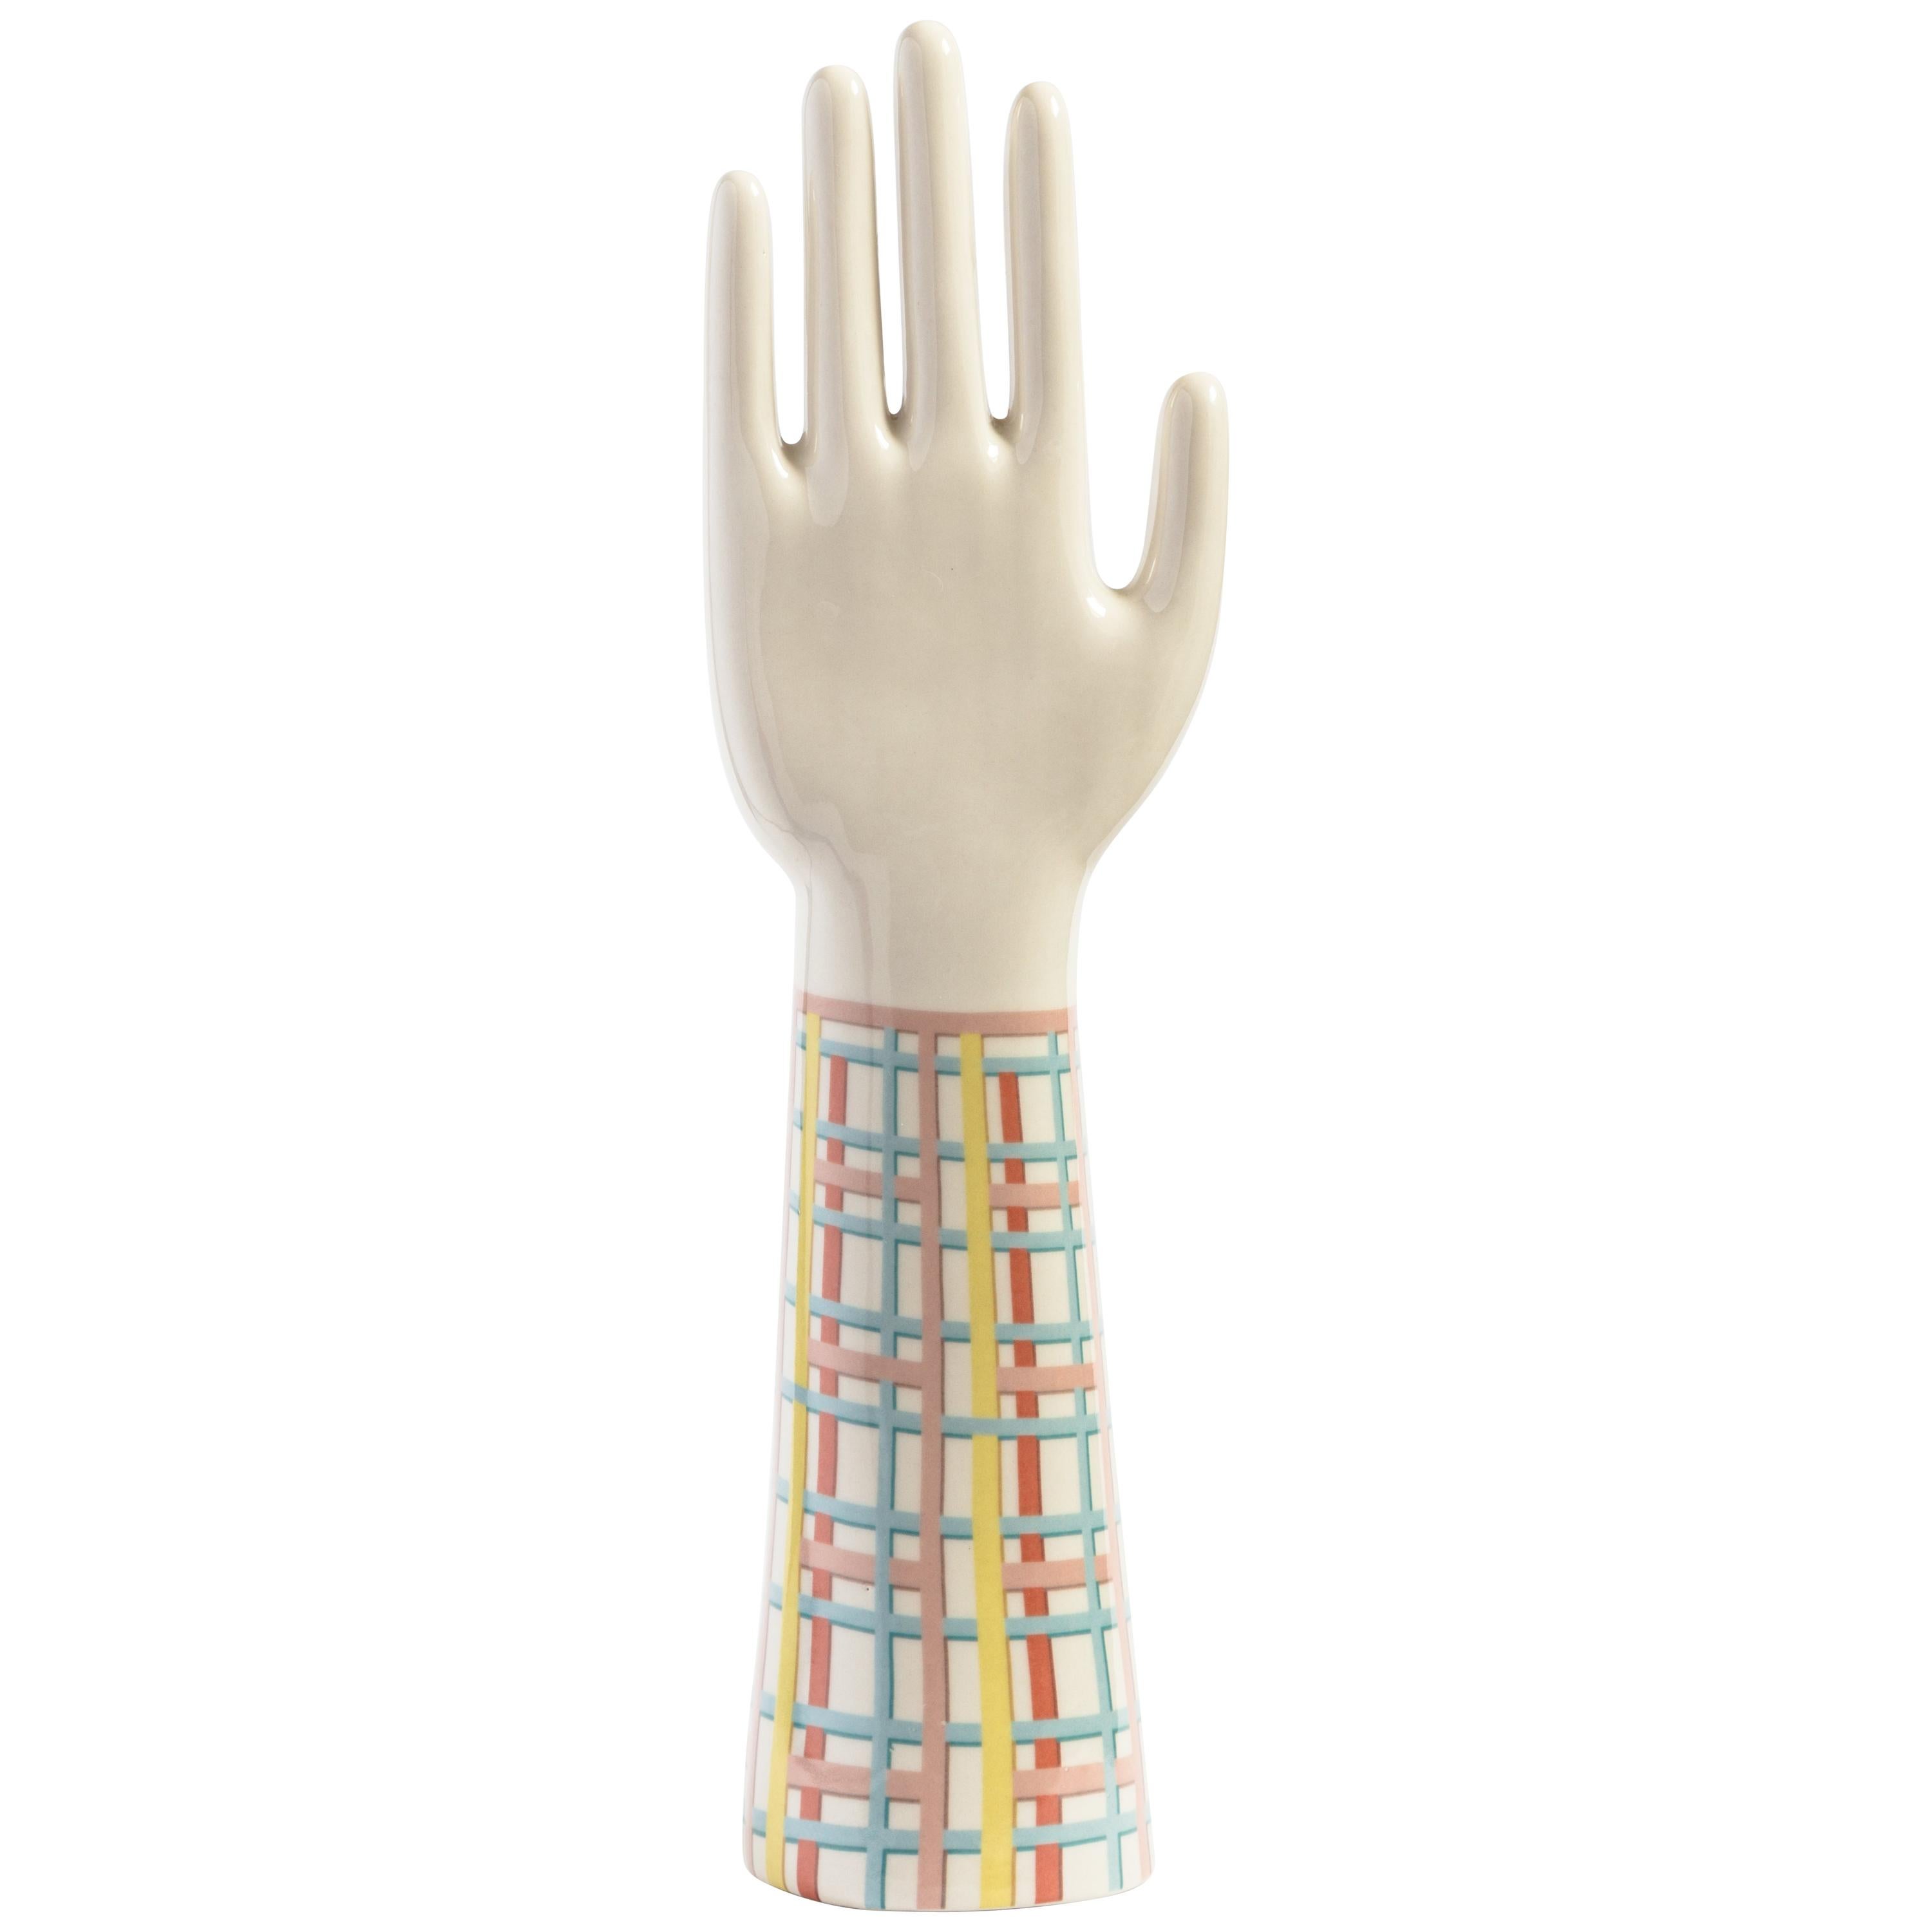 Anatomica, Porcelain Hand with 1990s Grid Decoration by Vito Nesta